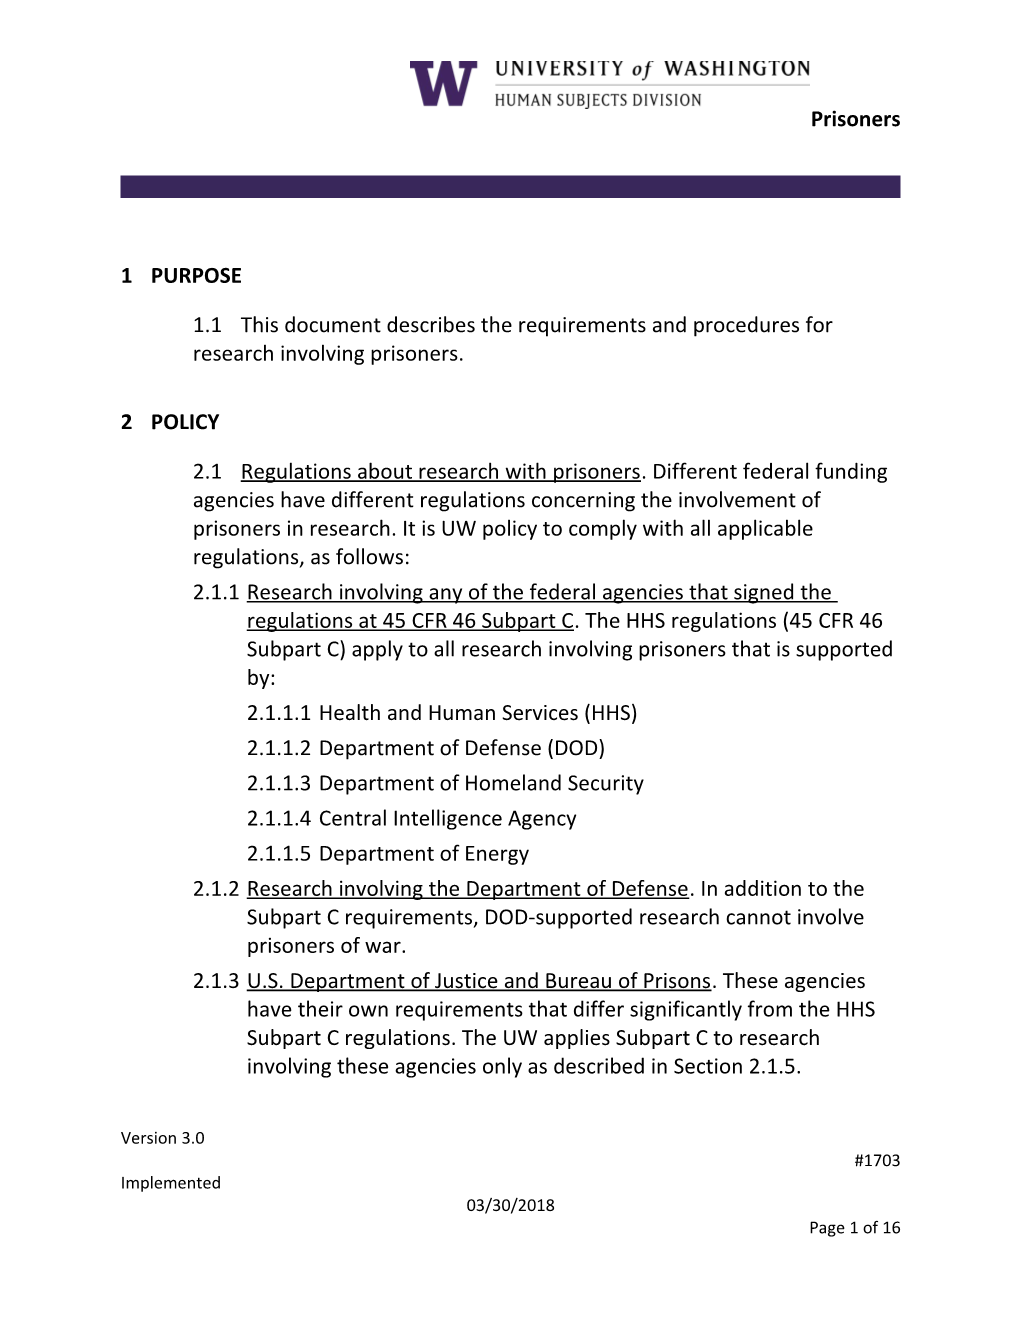 1.1This Document Describes the Requirements and Procedures for Research Involving Prisoners